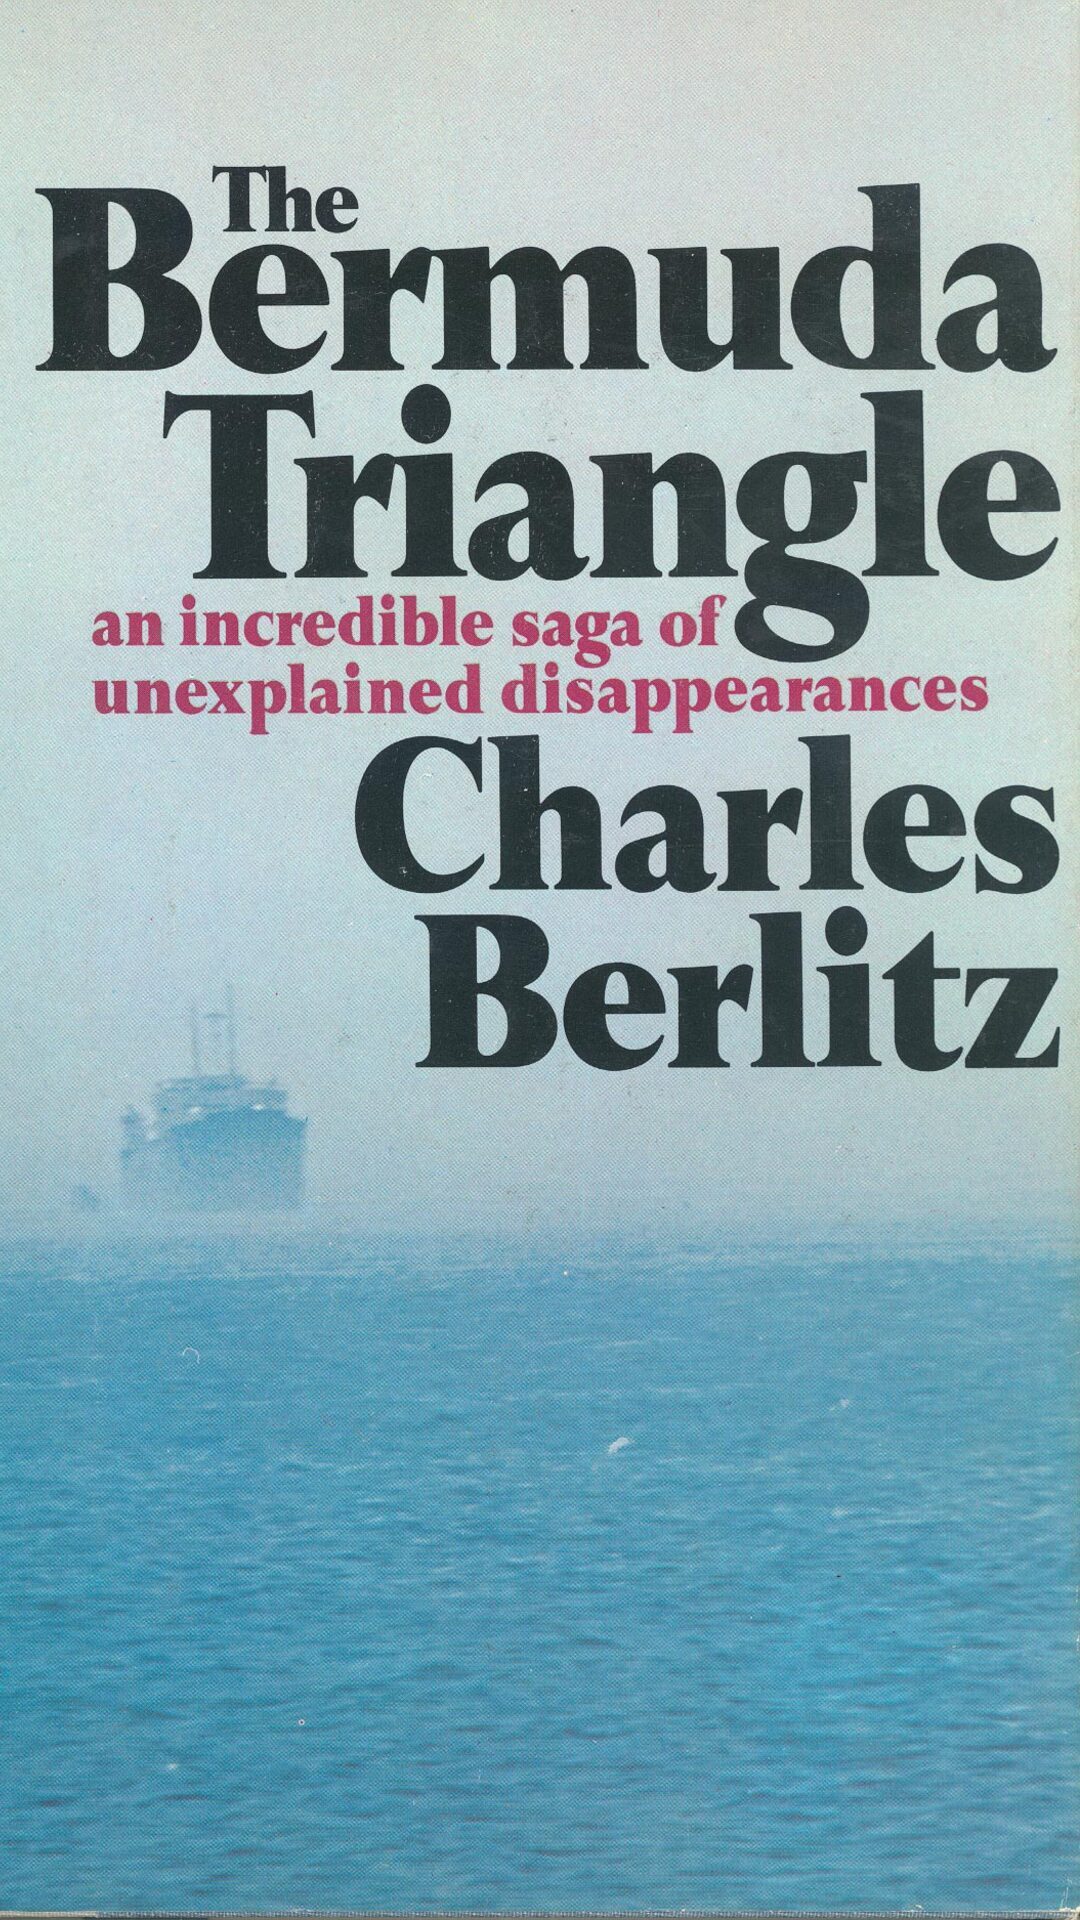 <p>It was Charles Berlitz who "invented" the Bermuda Triangle with a book published in 1973. He had heard stories of pilots and sailors who considered that area "cursed", and so decided to compile those enigmatic tales.</p>